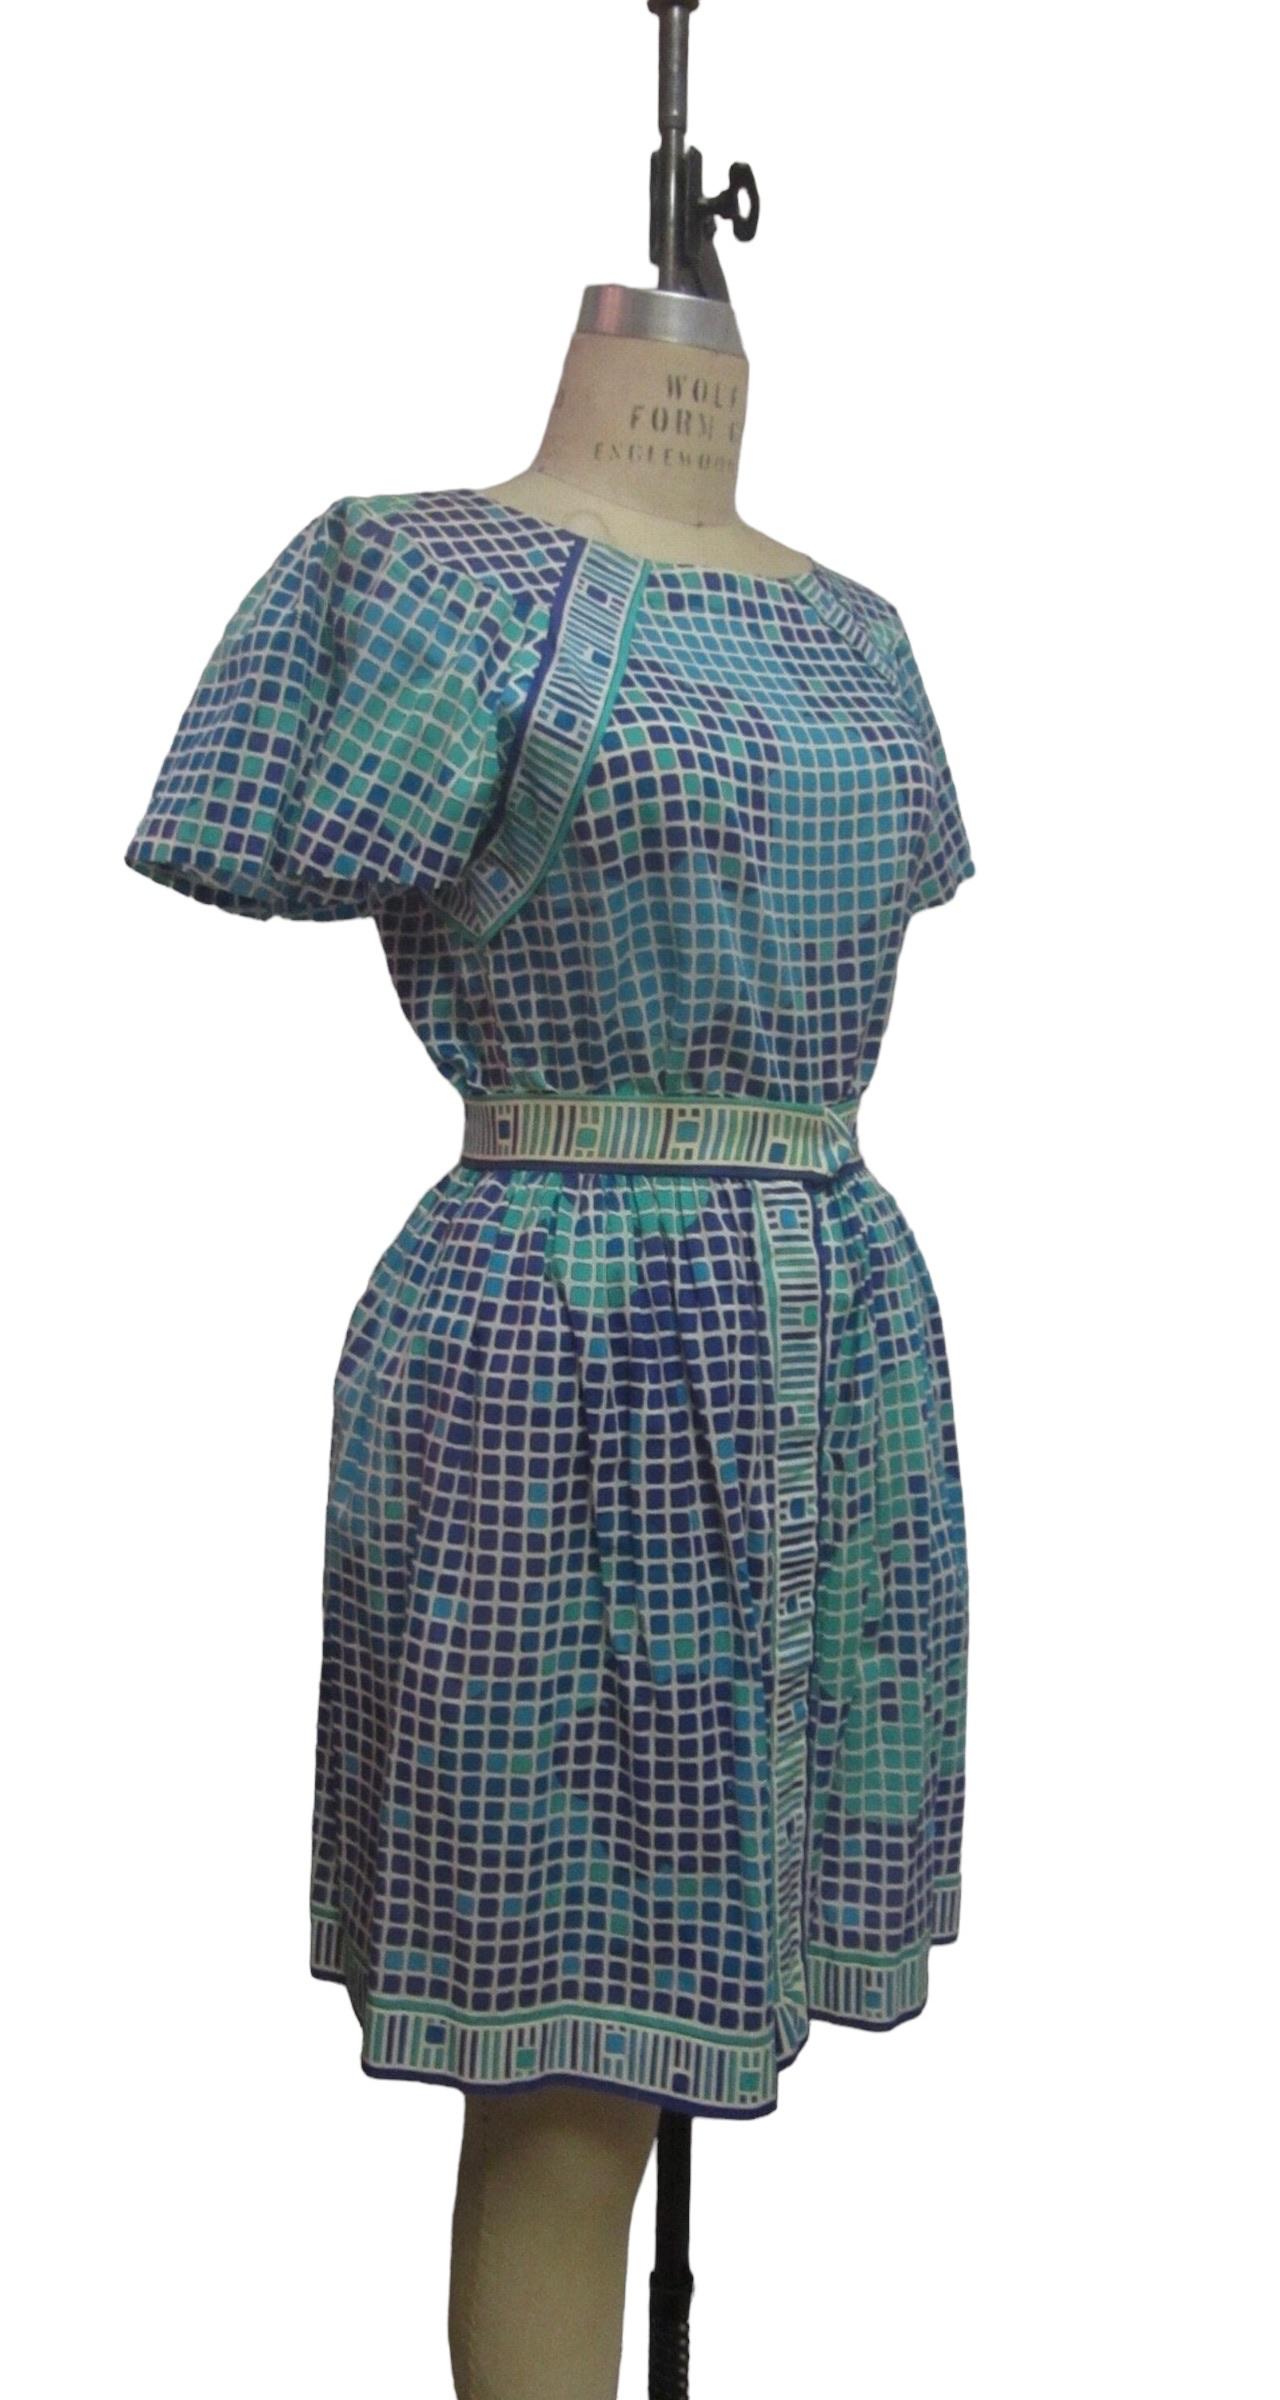 Emilio Pucci Cotton Geometric Print Top and Skirt Set, Circa 1960s In Excellent Condition For Sale In Brooklyn, NY